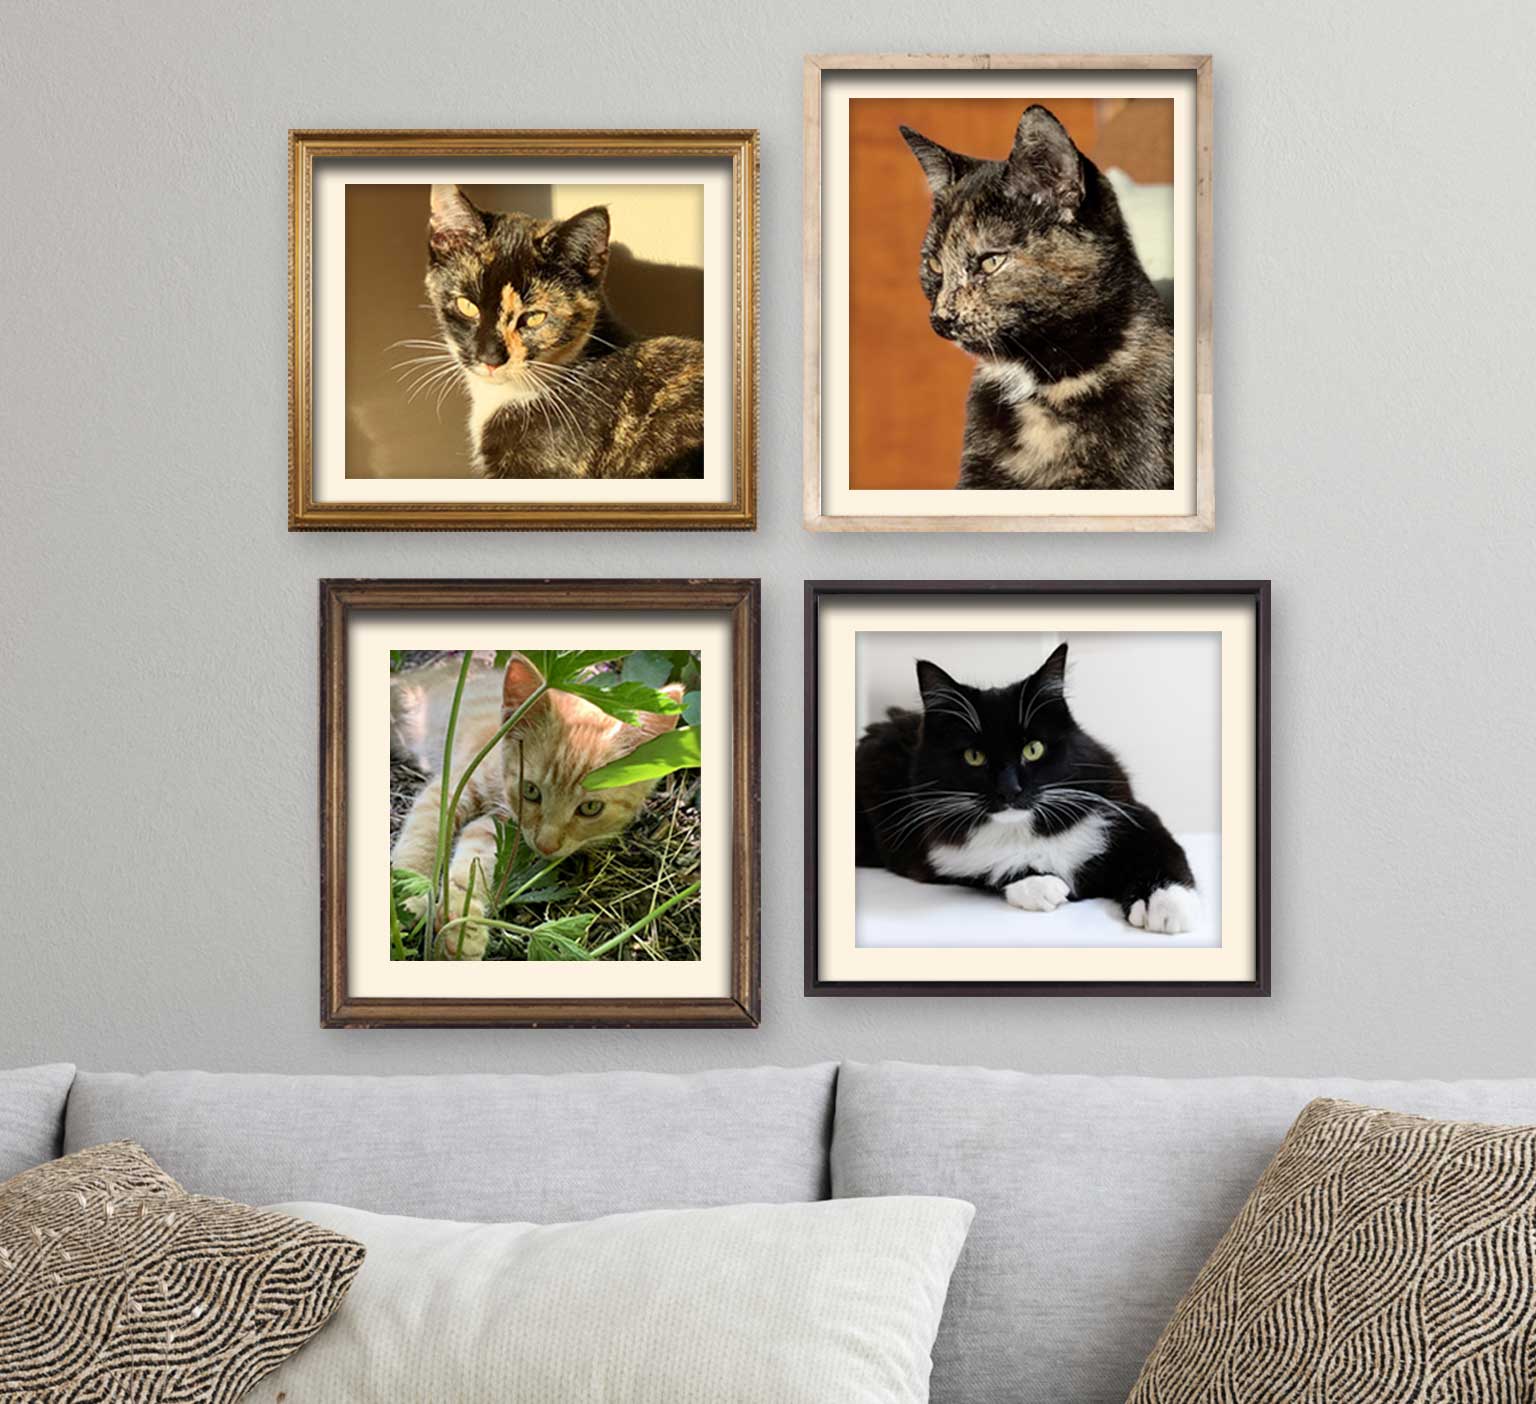 Add your adopted cat to our wall!